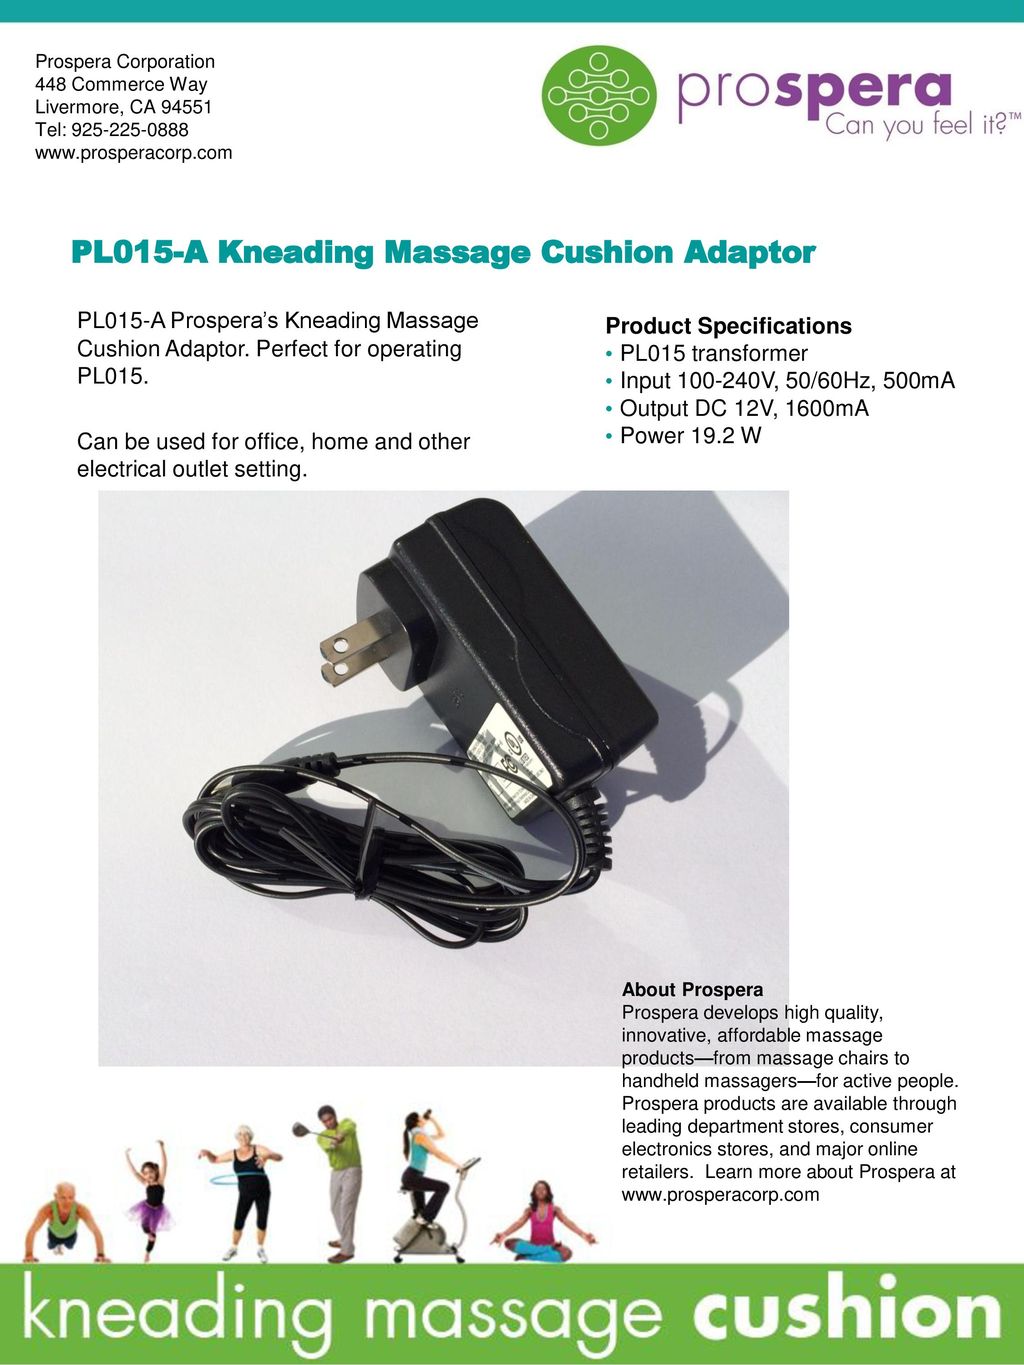 Pl015 A Kneading Massage Cushion Adaptor Ppt Download